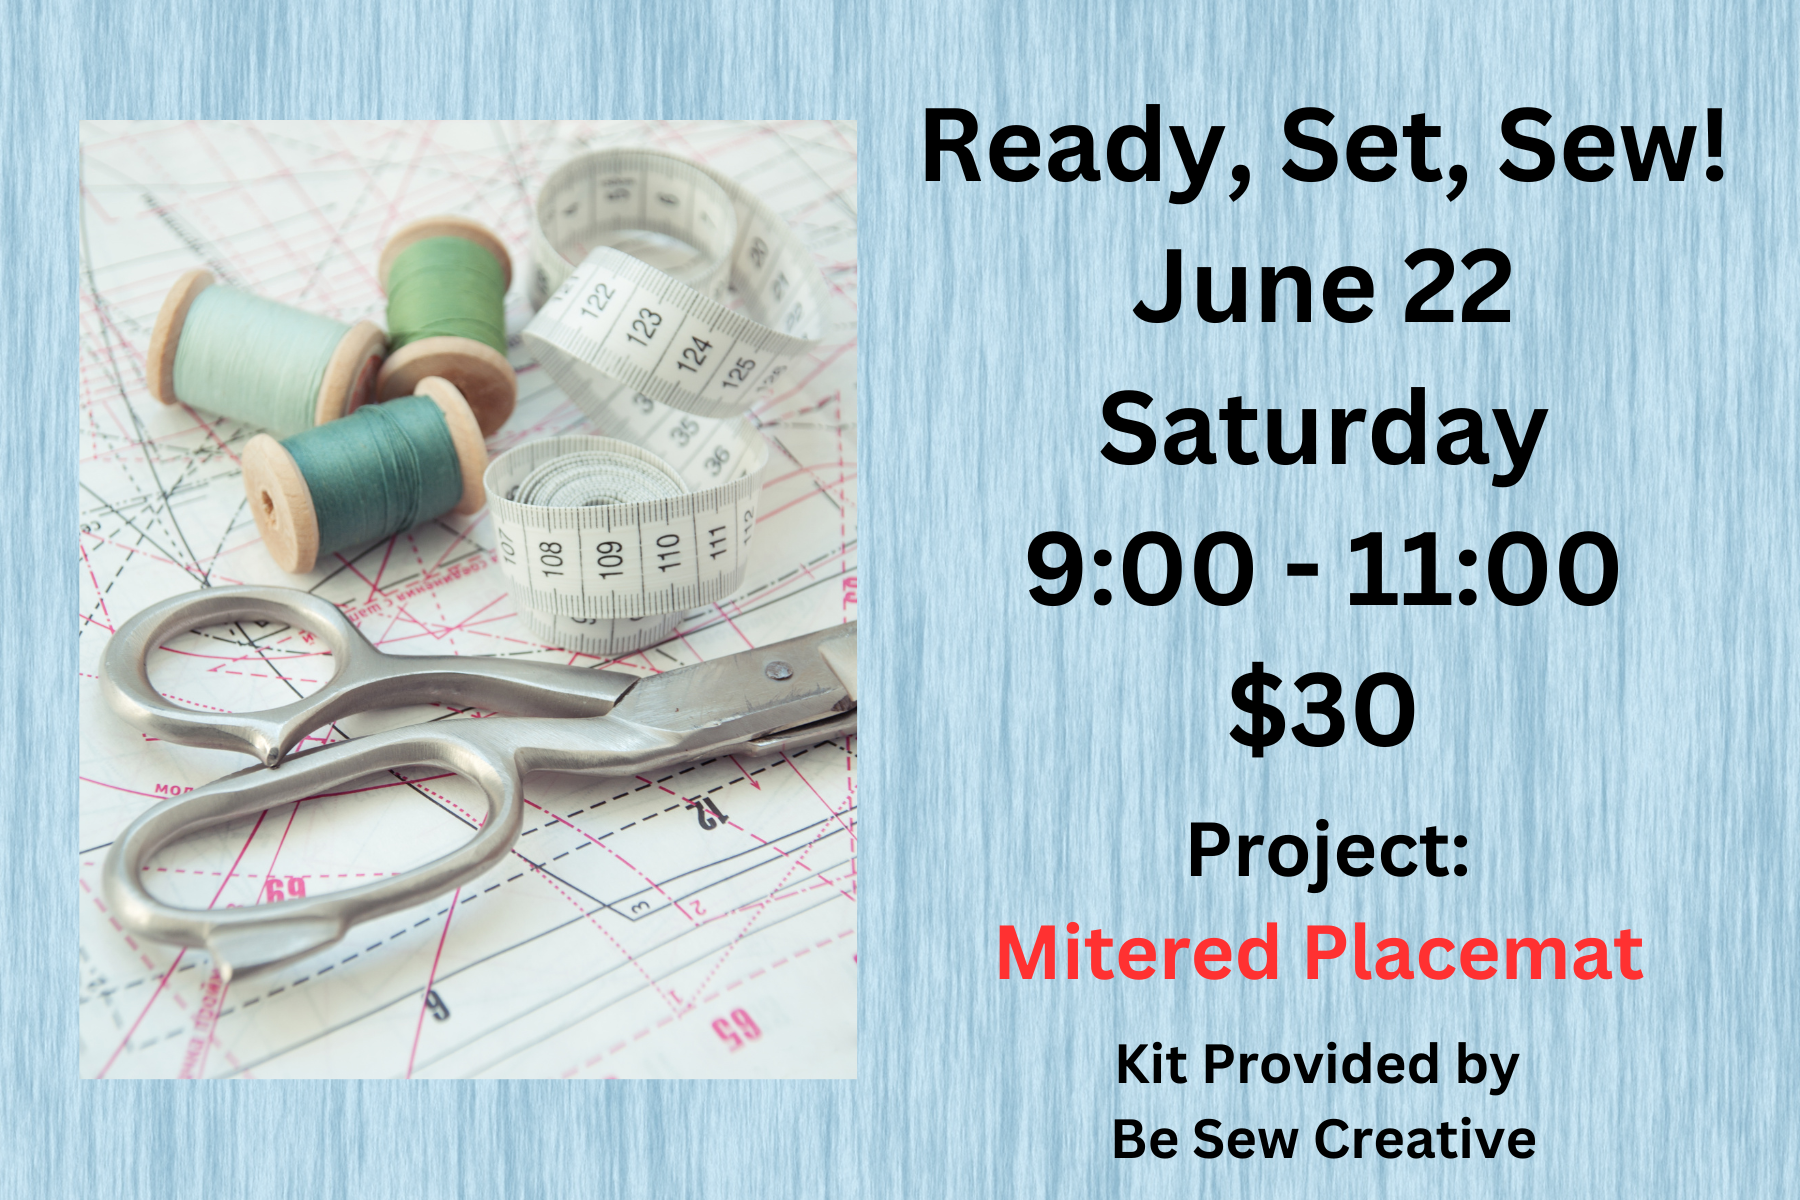 Ready Set Sew - June 22 - Mitered Placemats 9:00 - 11:00